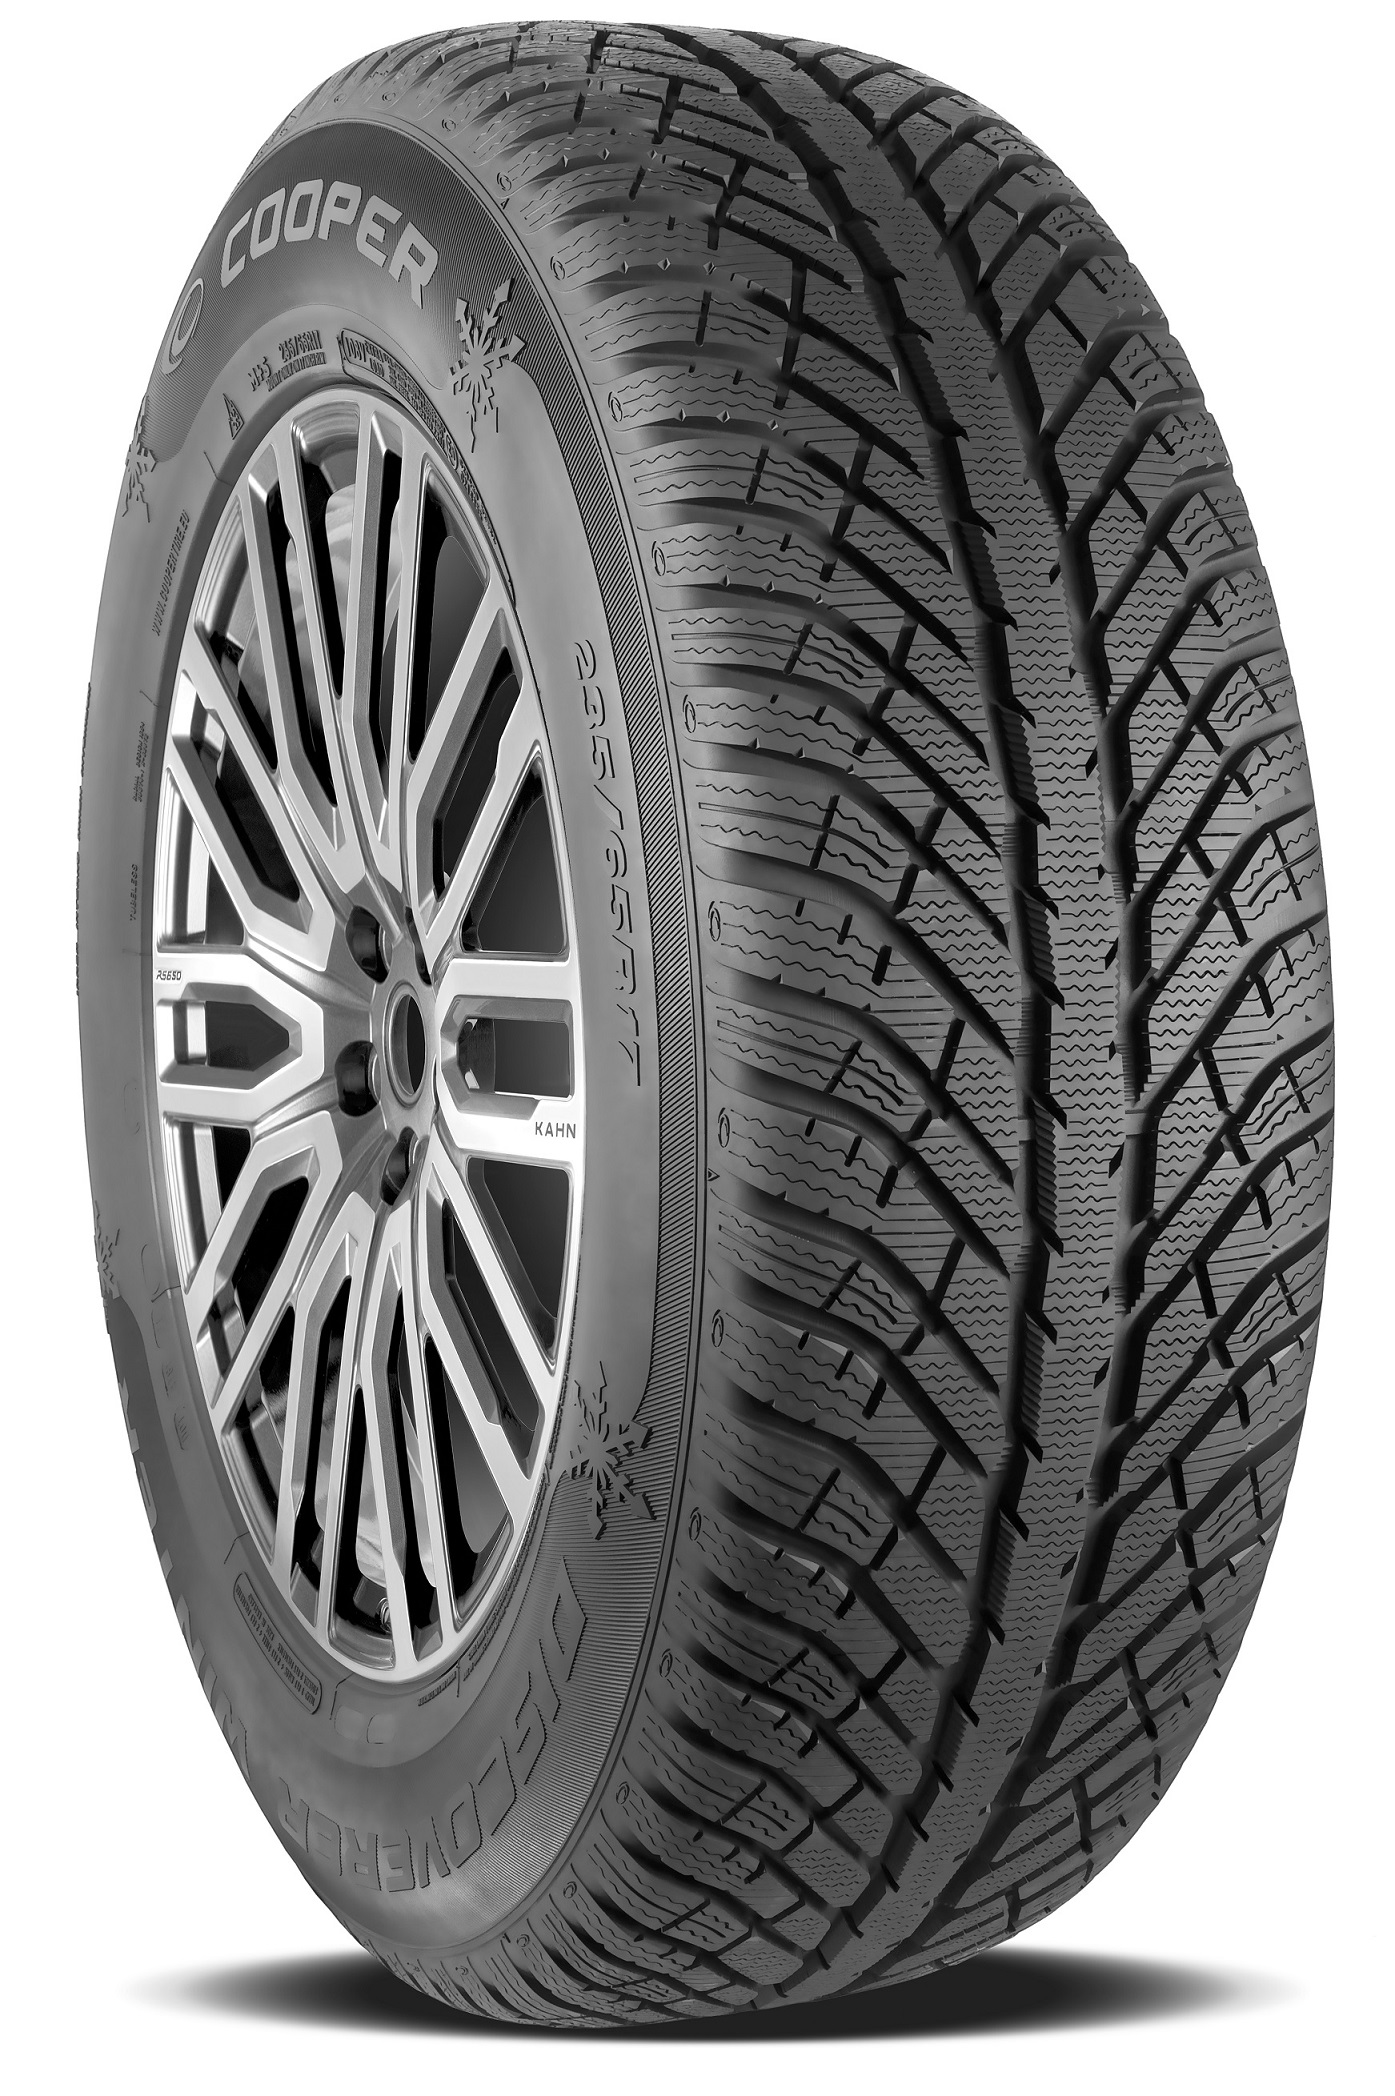 Gomme Nuove Cooper Tyres 225/45 R18 95V DISCOVERER WINTER M+S pneumatici nuovi Invernale